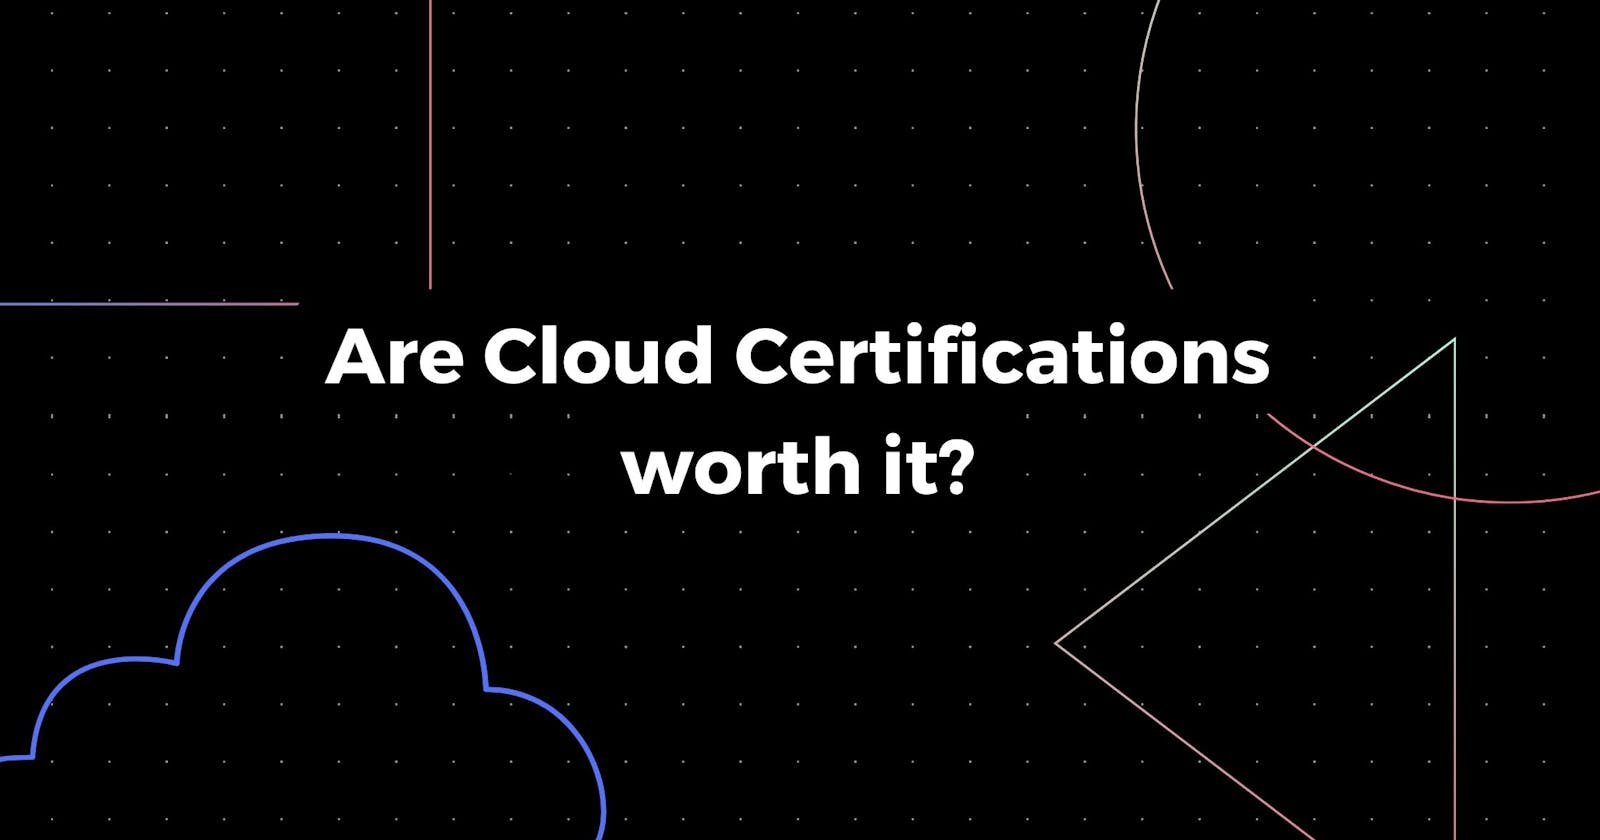 Are Cloud Certifications worth it?